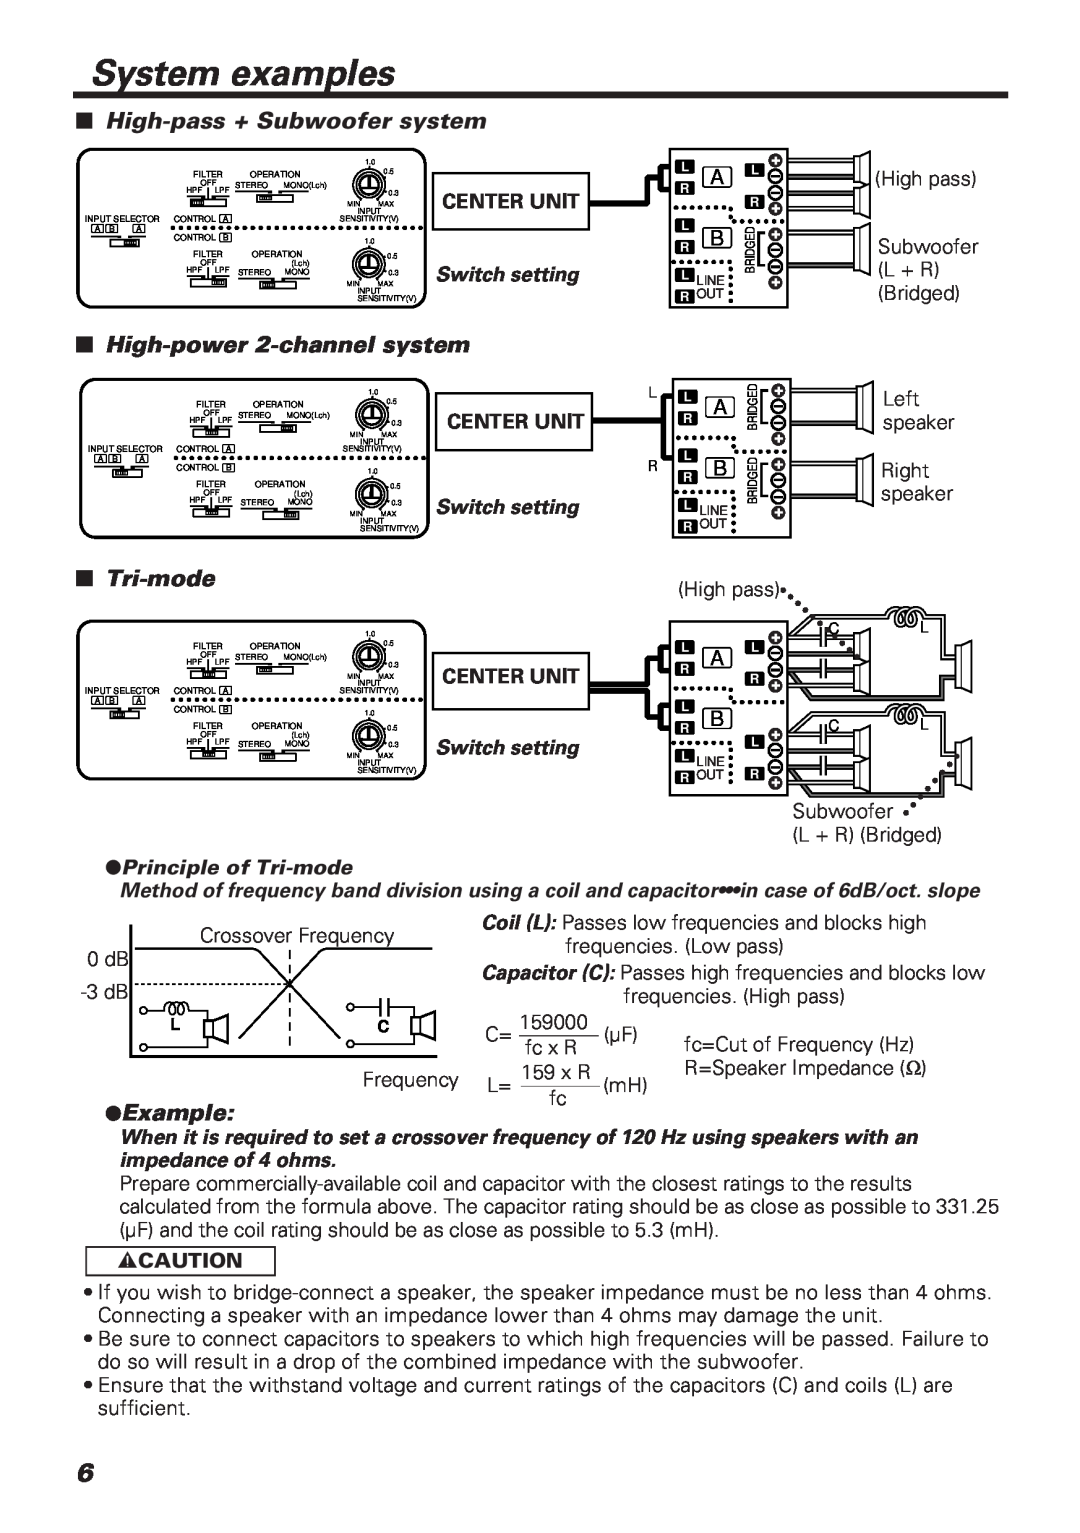 Kenwood KAC-648 instruction manual System examples, Switch setting, Principle of Tri-mode, impedance of 4 ohms, 2CAUTION 